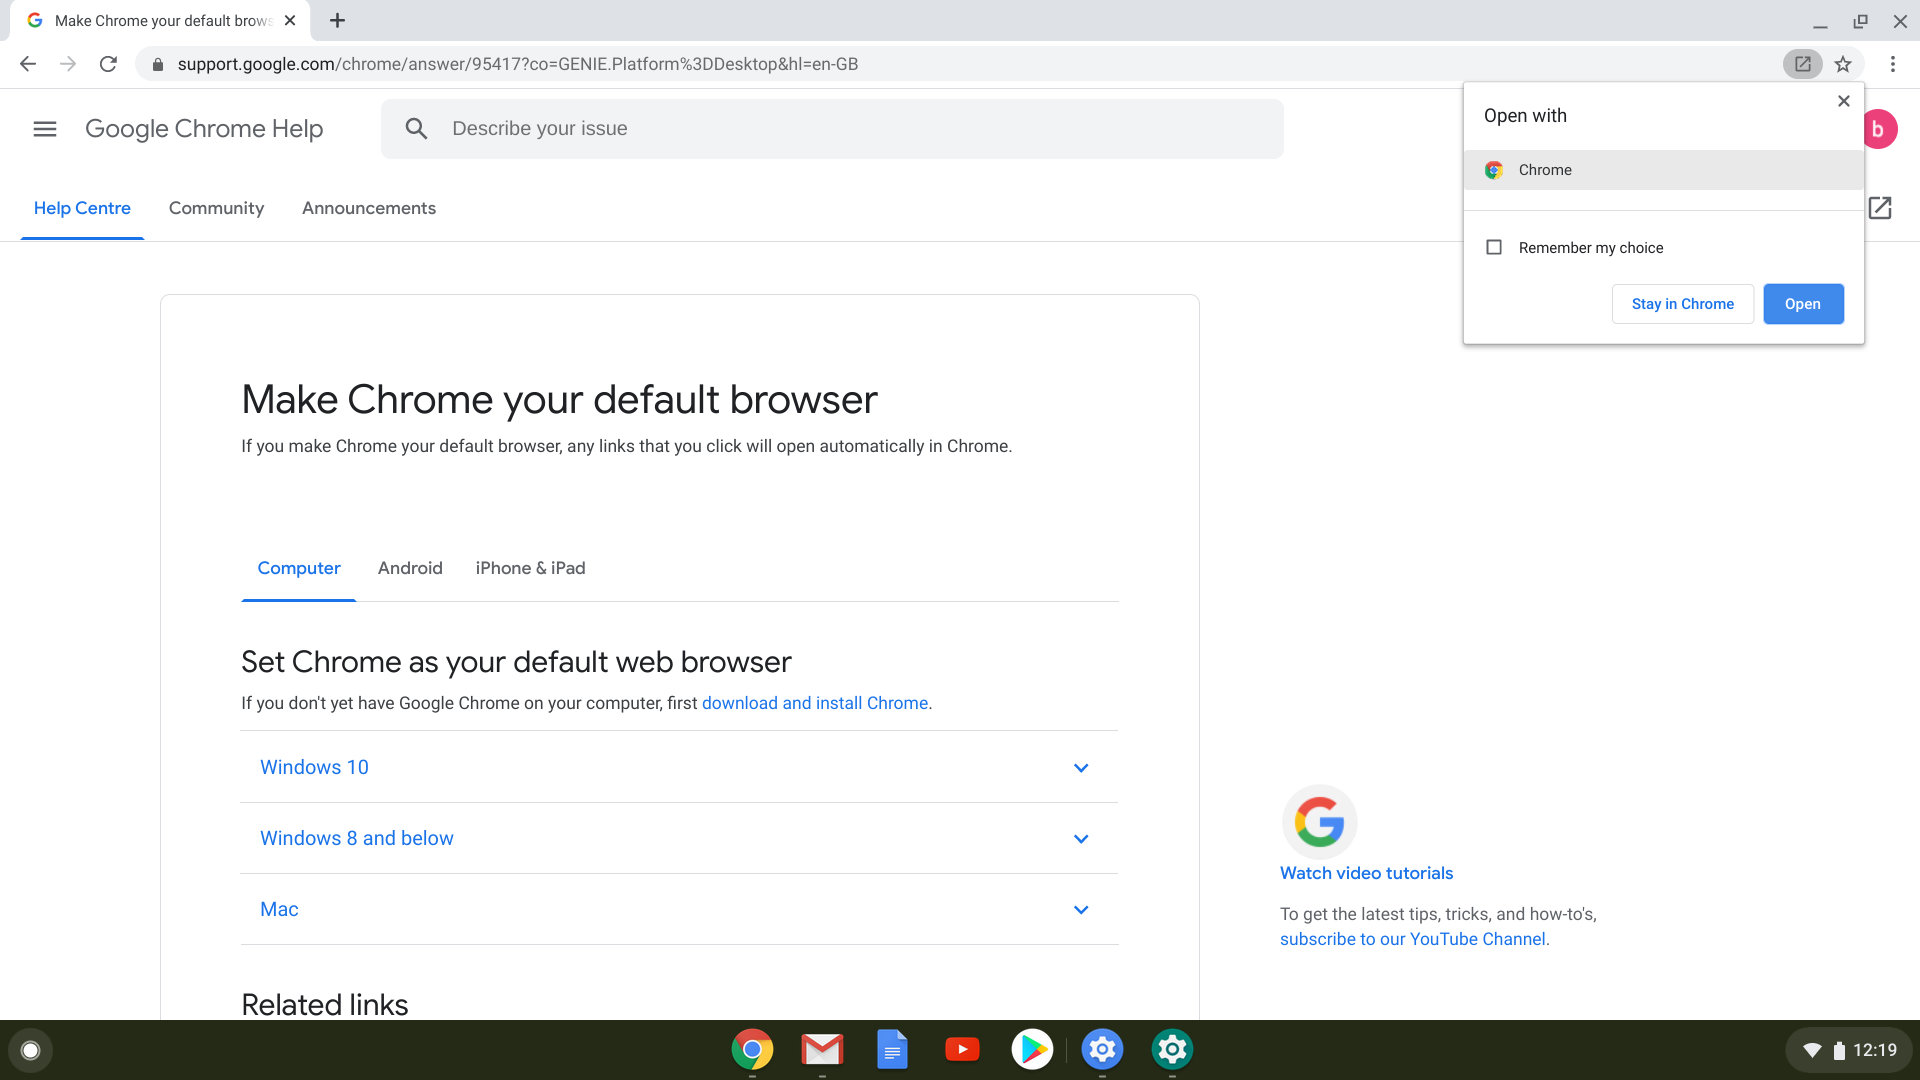 Go to Google Chrome, open the browser, and then open the Settings.